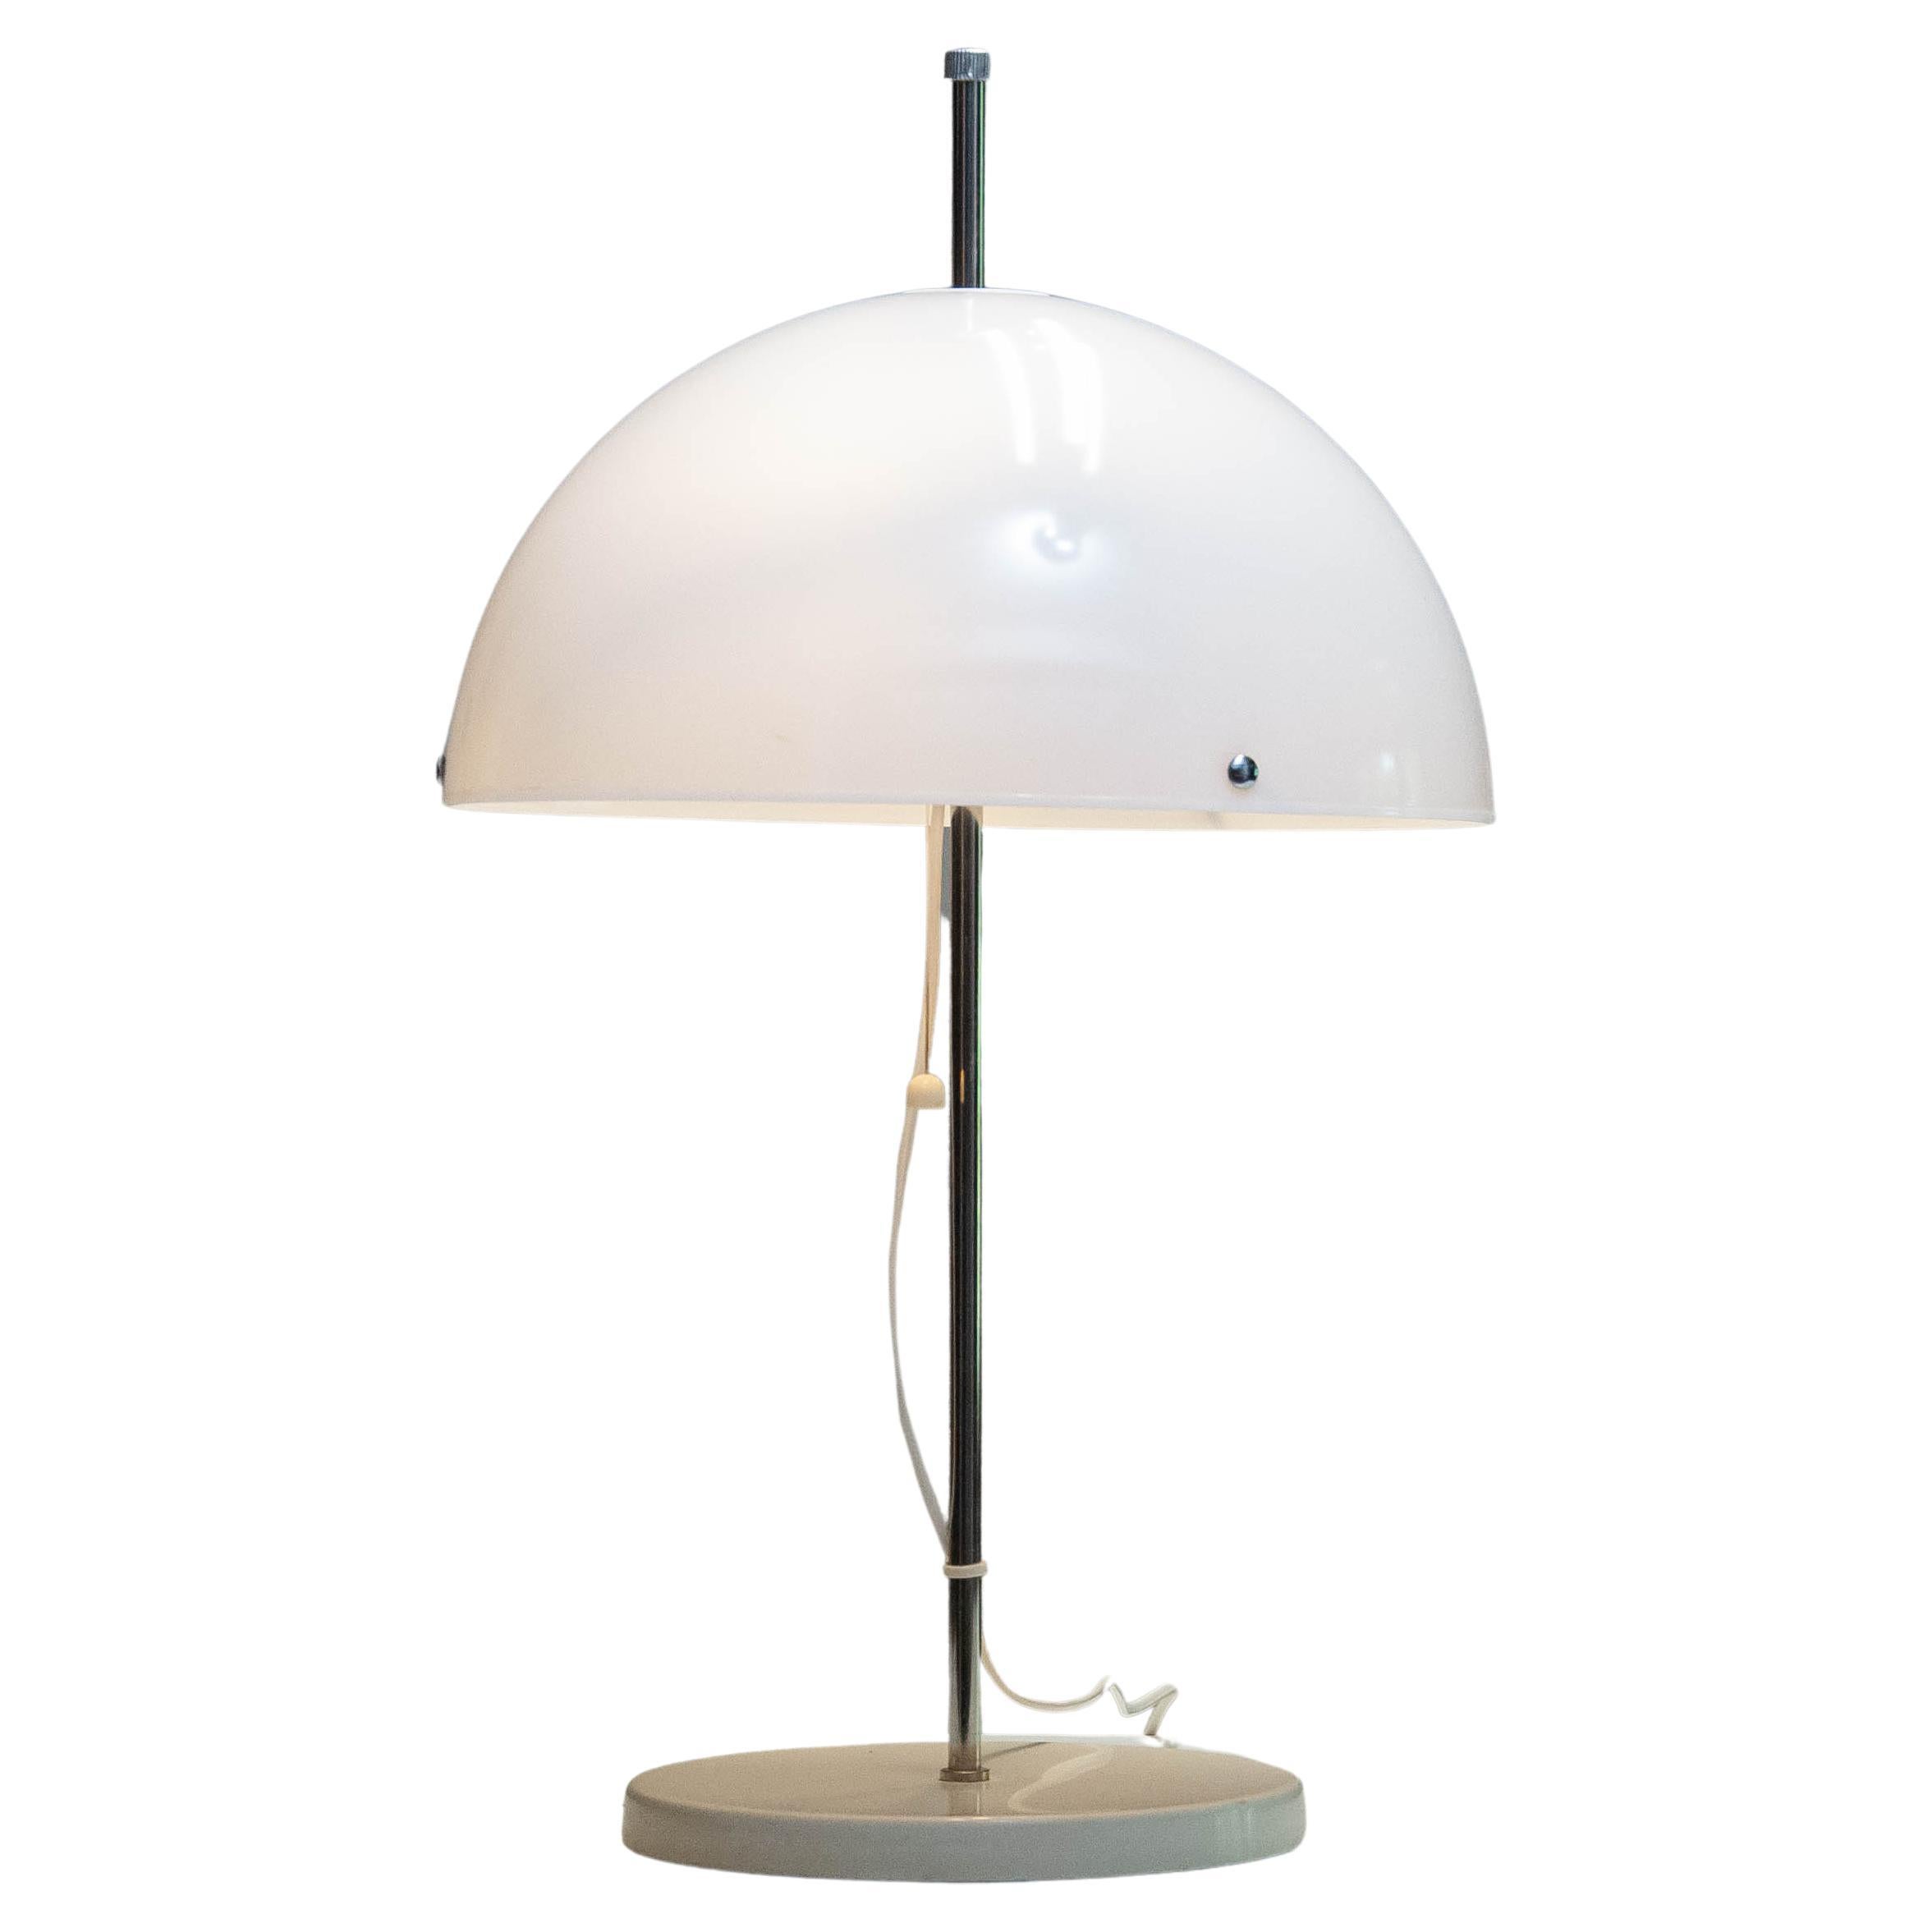 1970s Chrome and White Acrylic Mushroom Table Lamp Made by Fagerhult Sweden